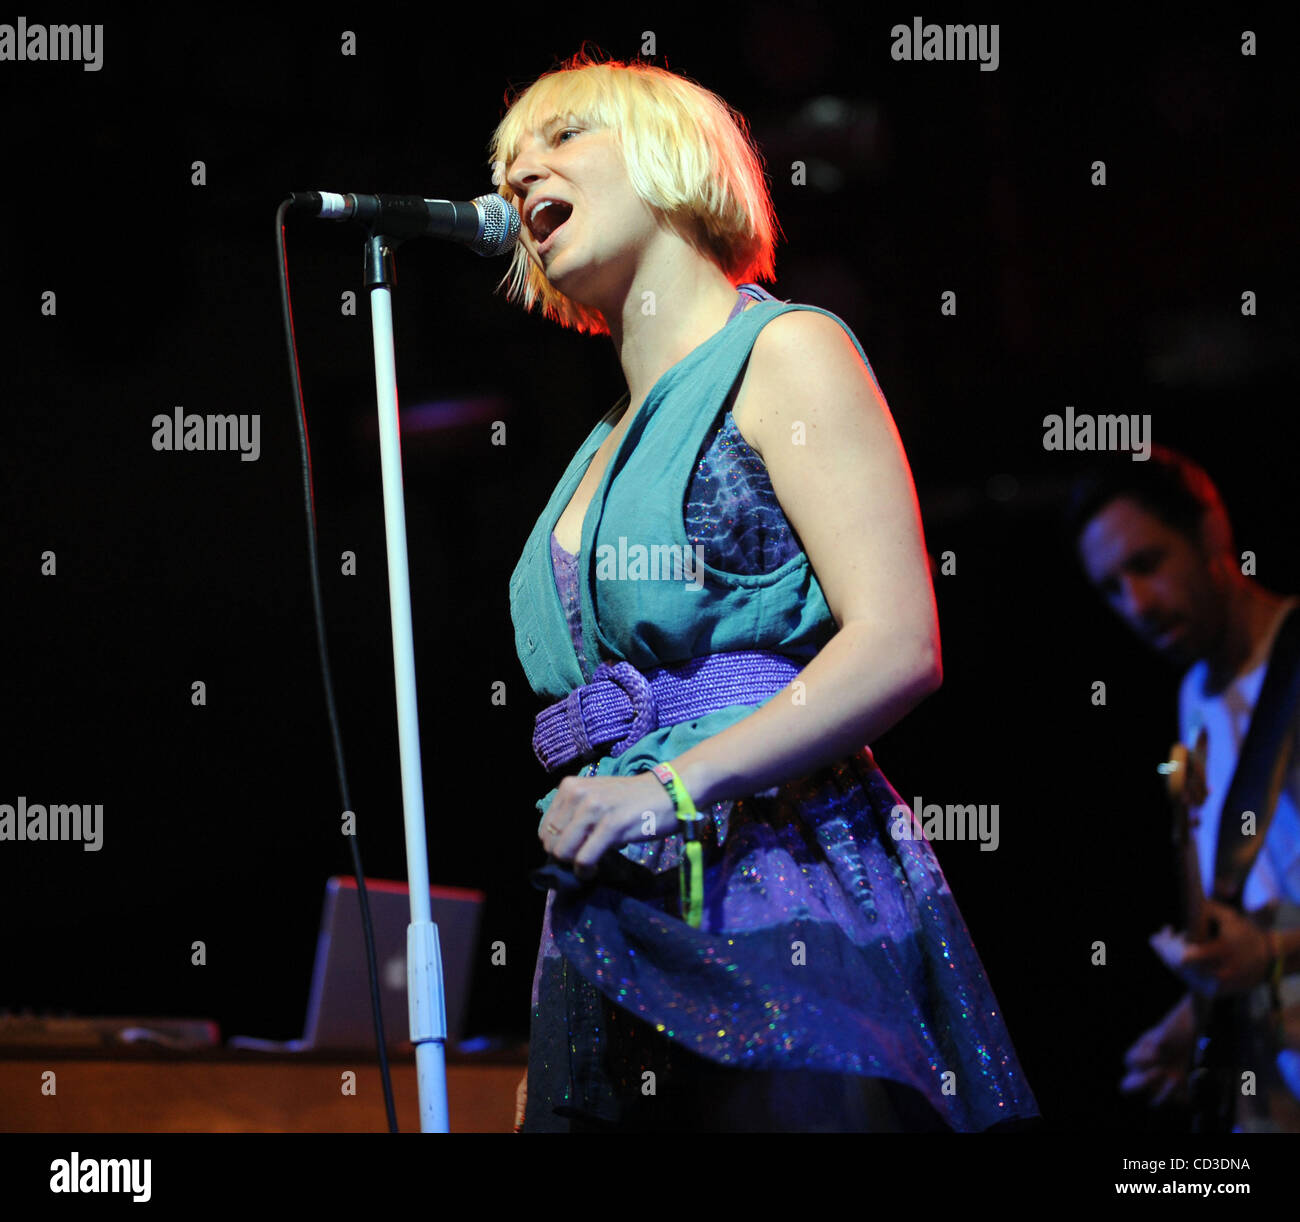 Apr 27, 2008 - Indio, California; USA - Musician SIA FURLER performs live as part of the 2008 Coachella Valley Music and Arts Festival that is taking place at the Empire Polo Field located in Indio.  The Three day festival will attract over 160,000 fans to see musicians on five different stages in t Stock Photo